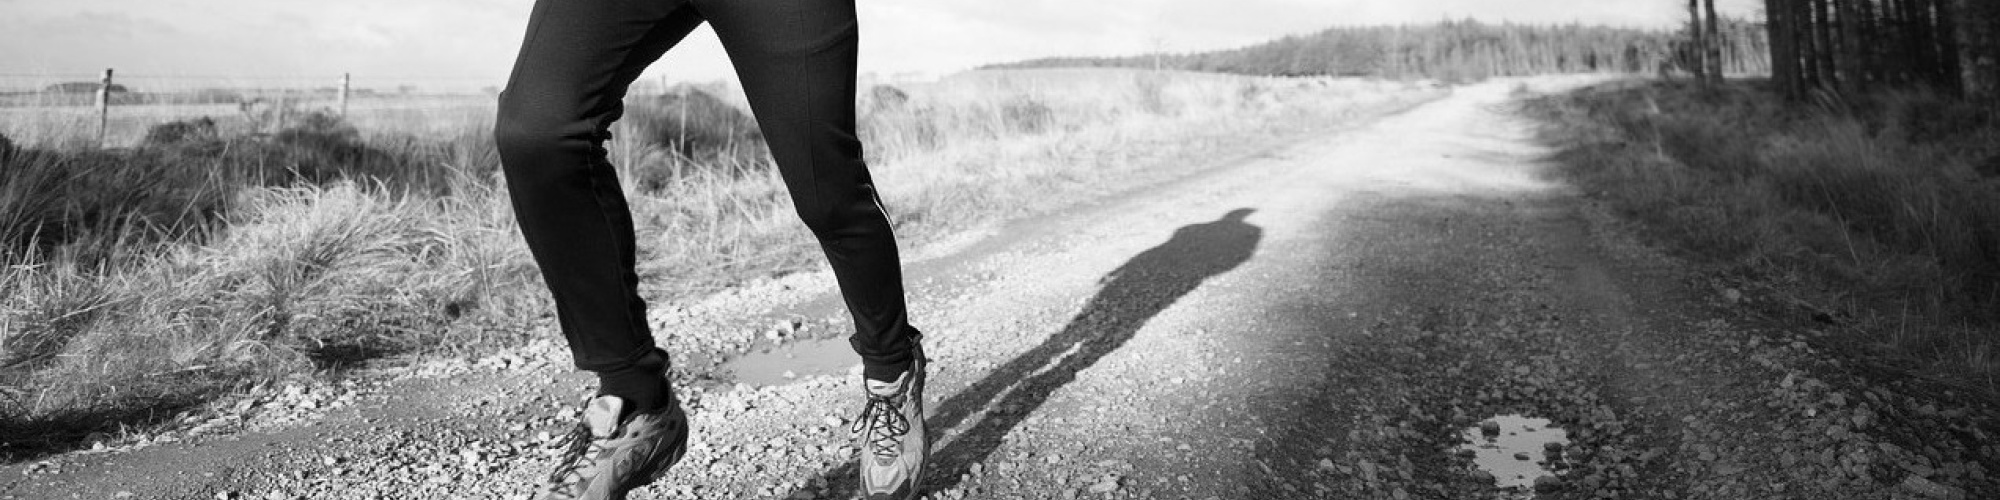 A photo in black and white of a man's shoes while running on a dirt road.